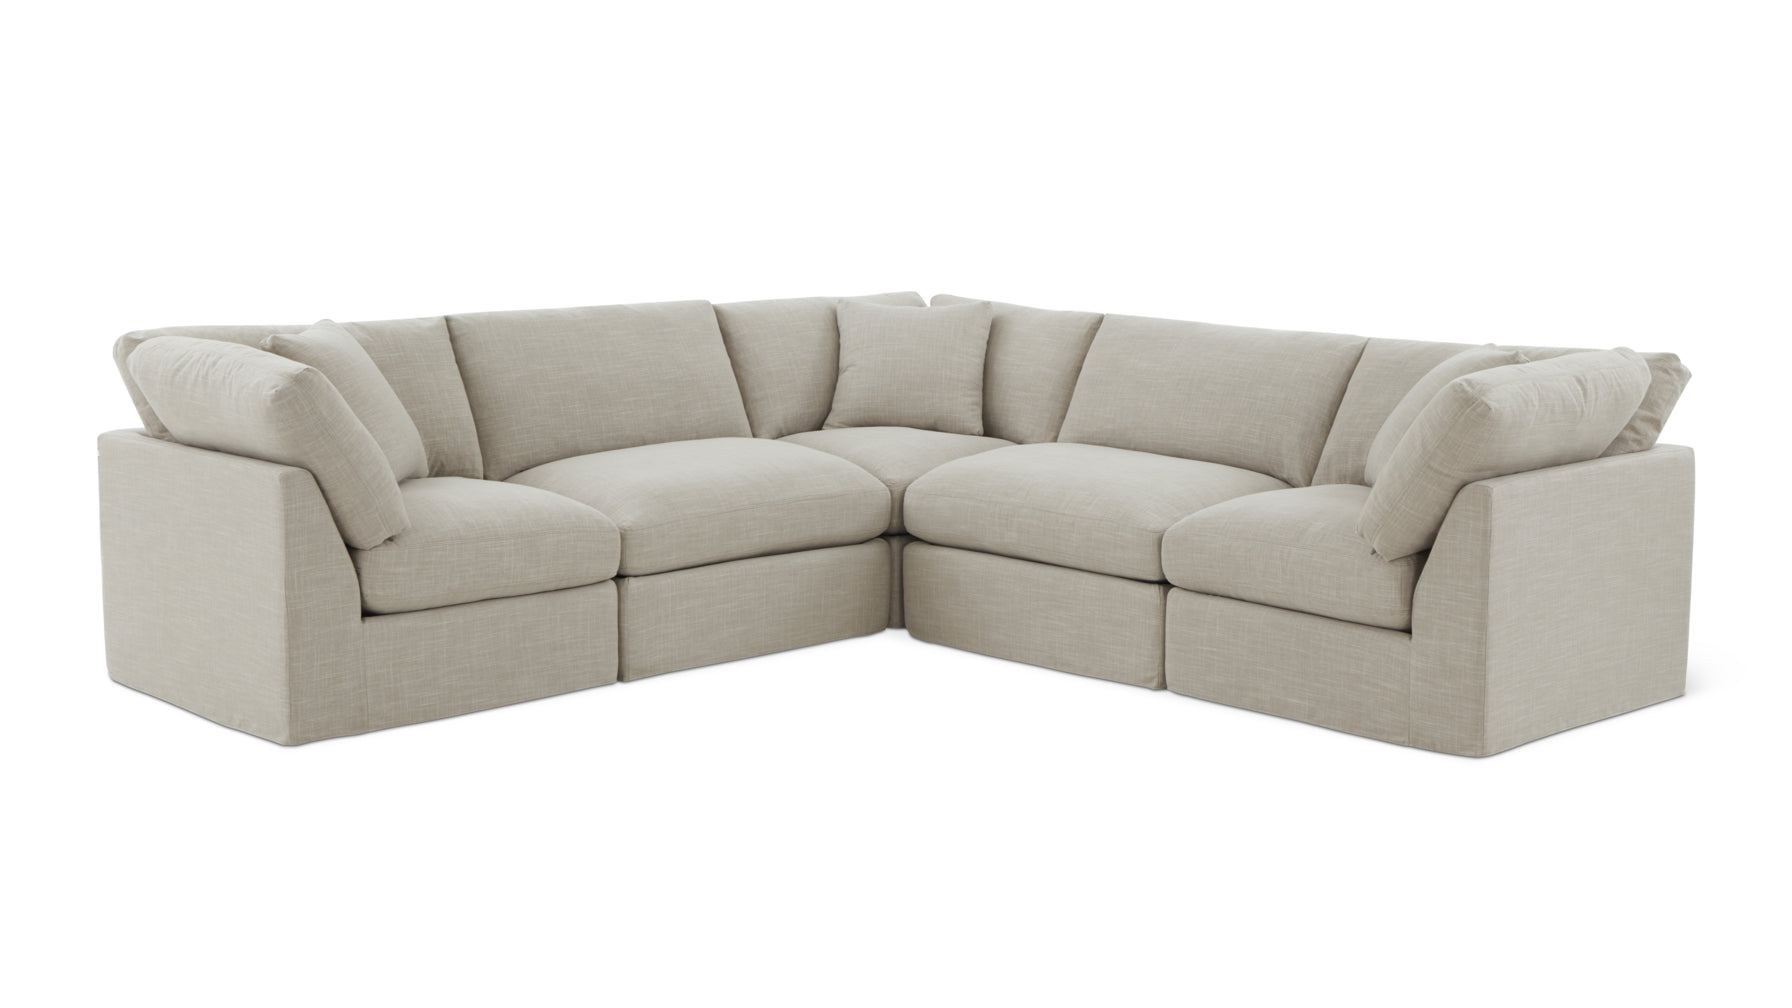 Get Together™ 5-Piece Modular Sectional Closed, Standard, Light Pebble - Image 6